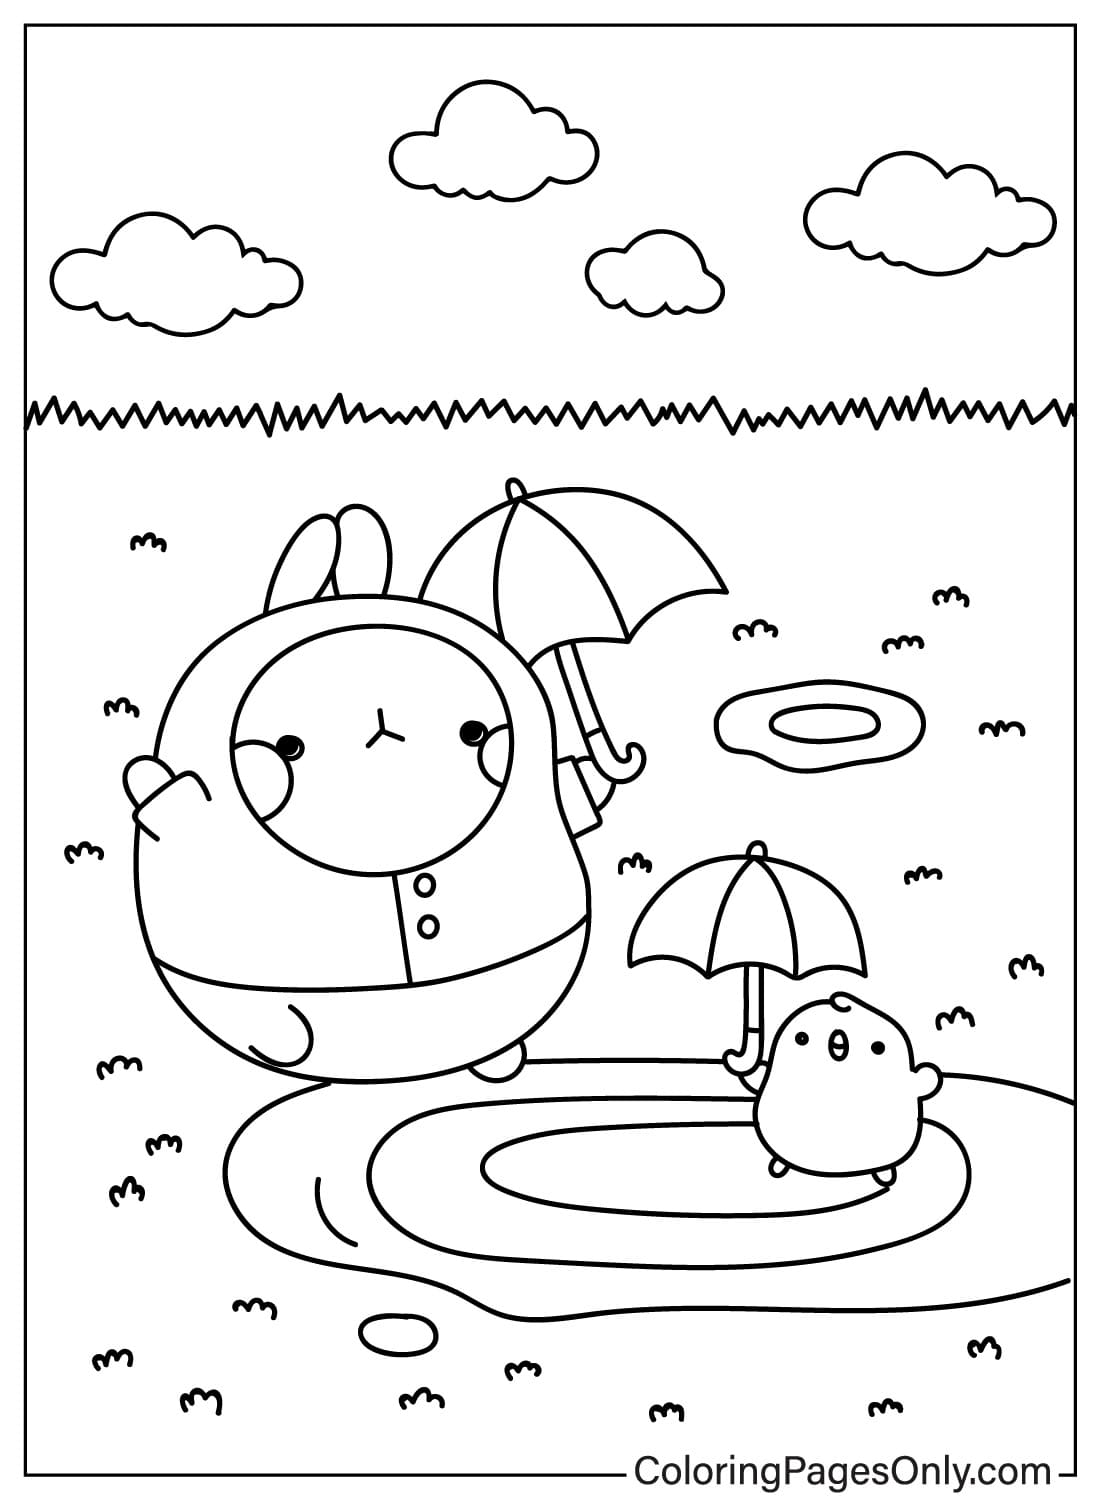 Molang & Piu Piu Play in Puddles Color Page from Molang